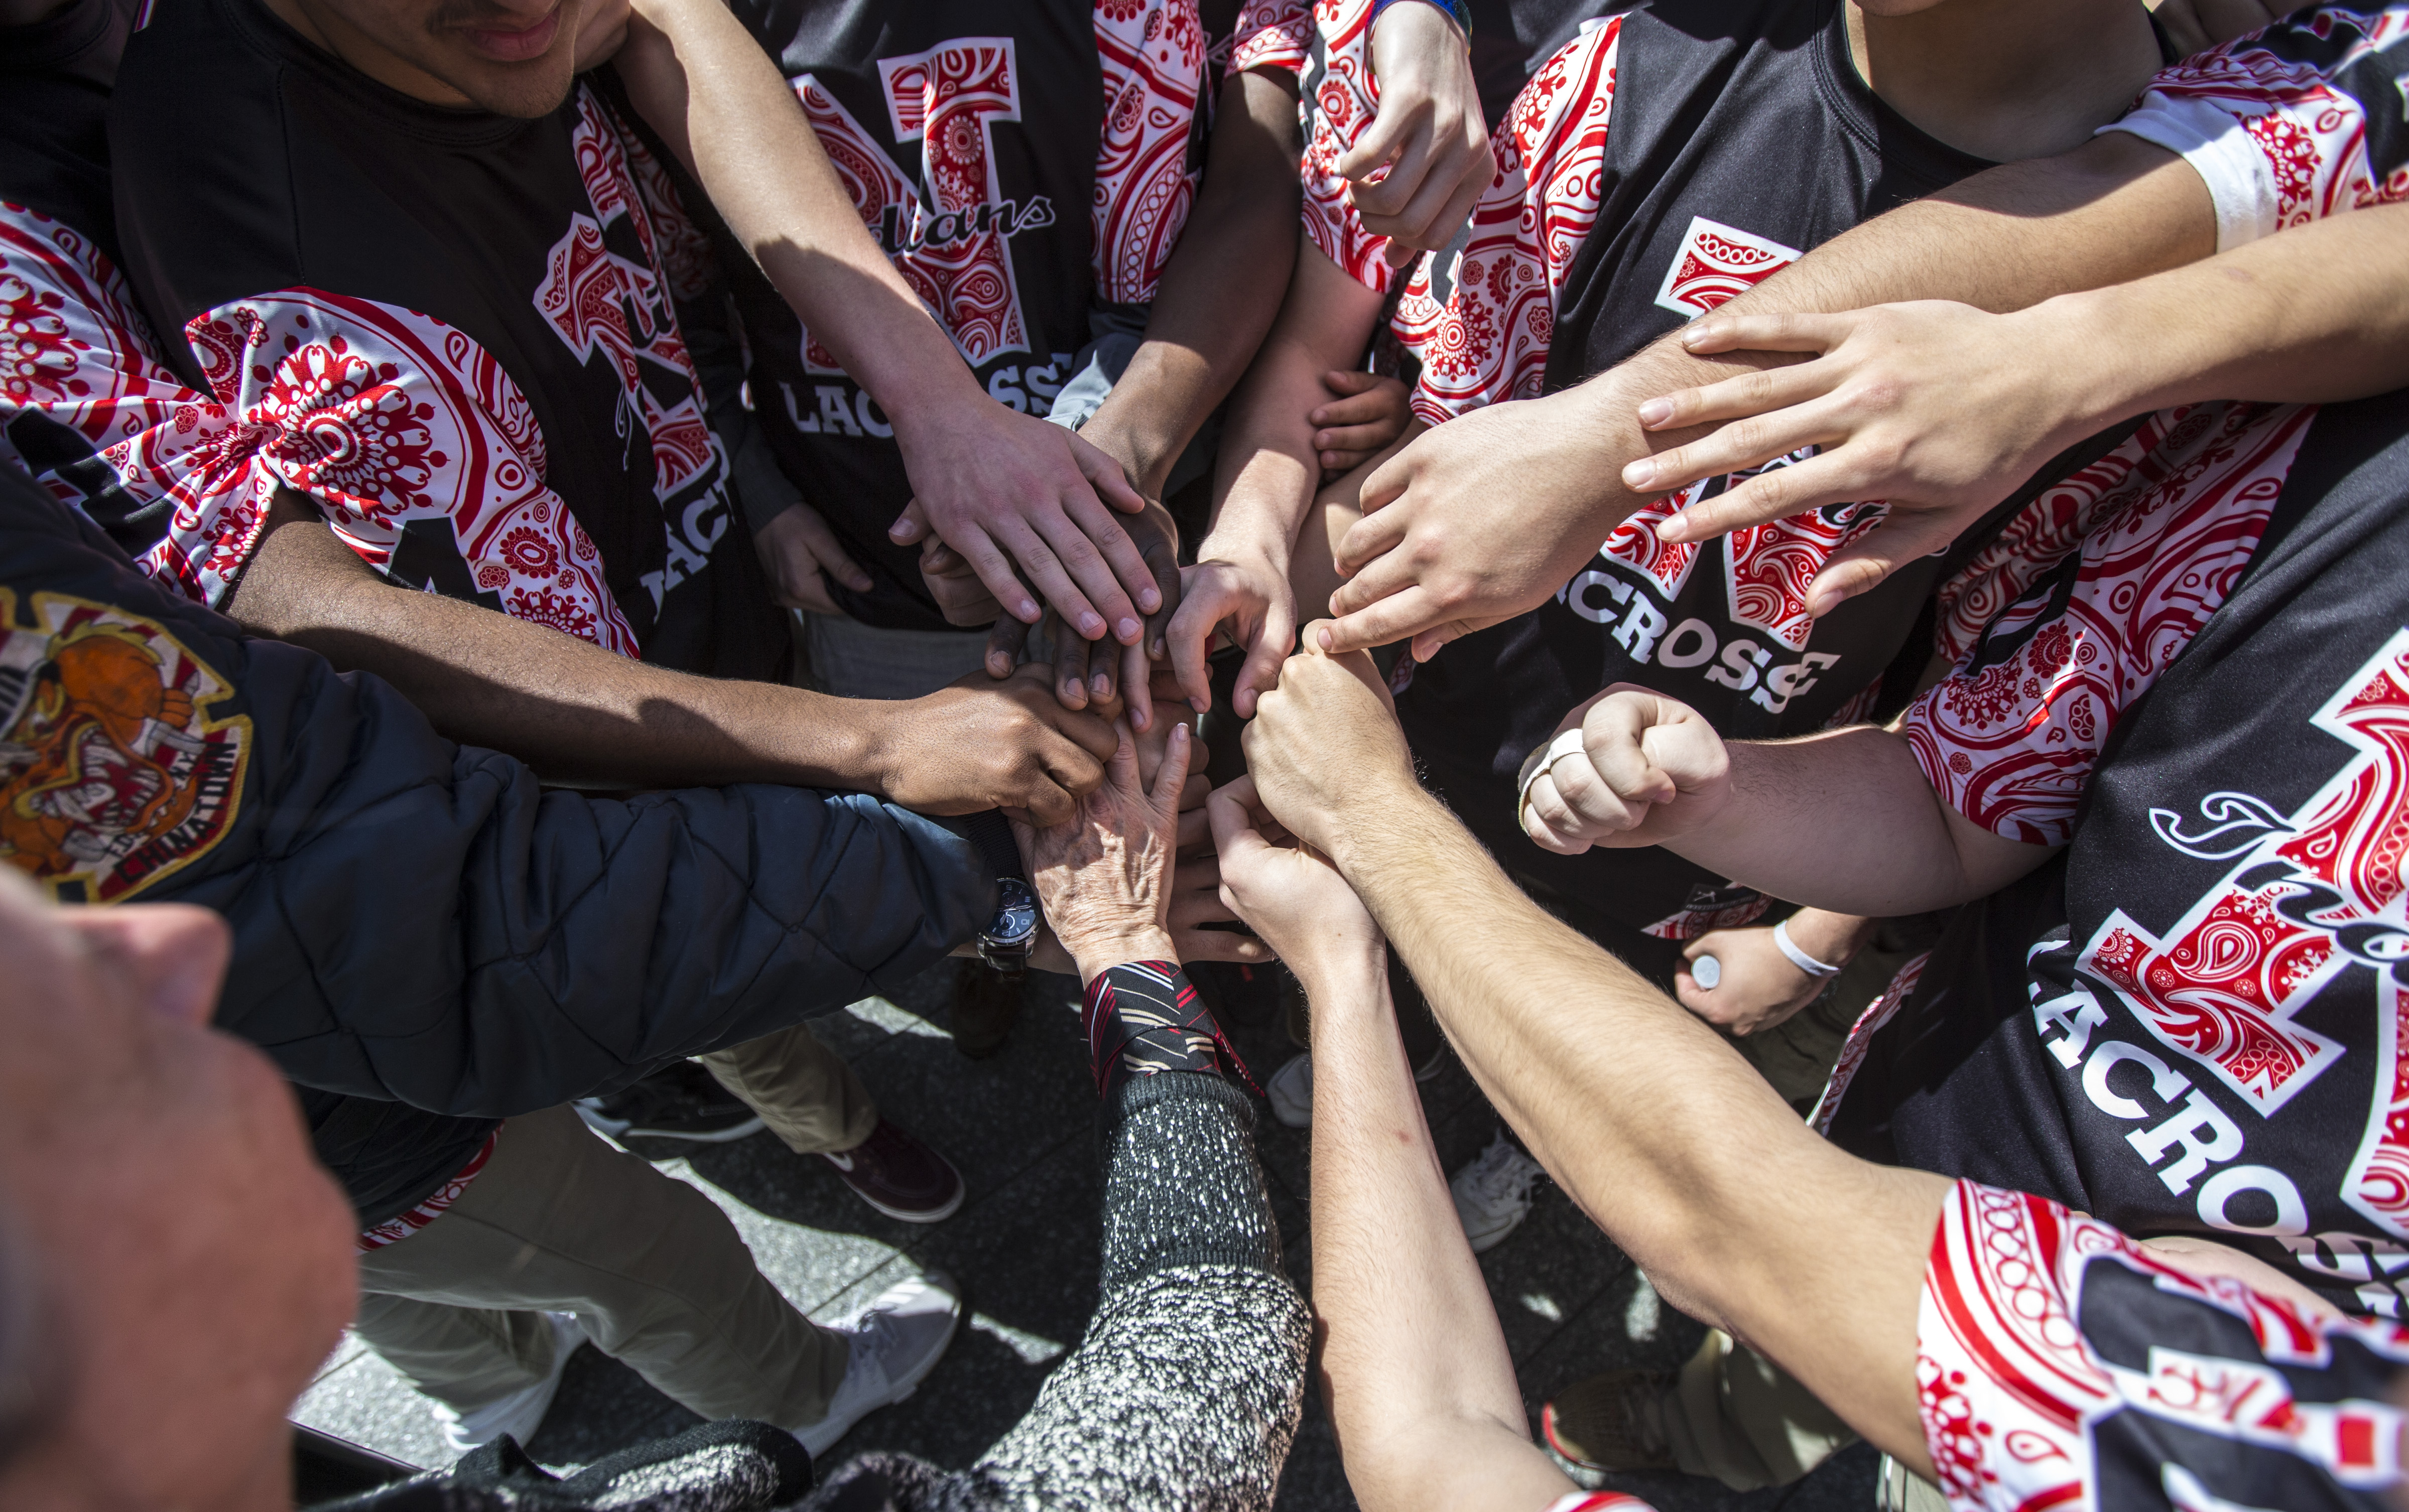 Members of the Nyack Boys varsity lacrosse team put their hands together in a circle while visiting Memorial plaza.